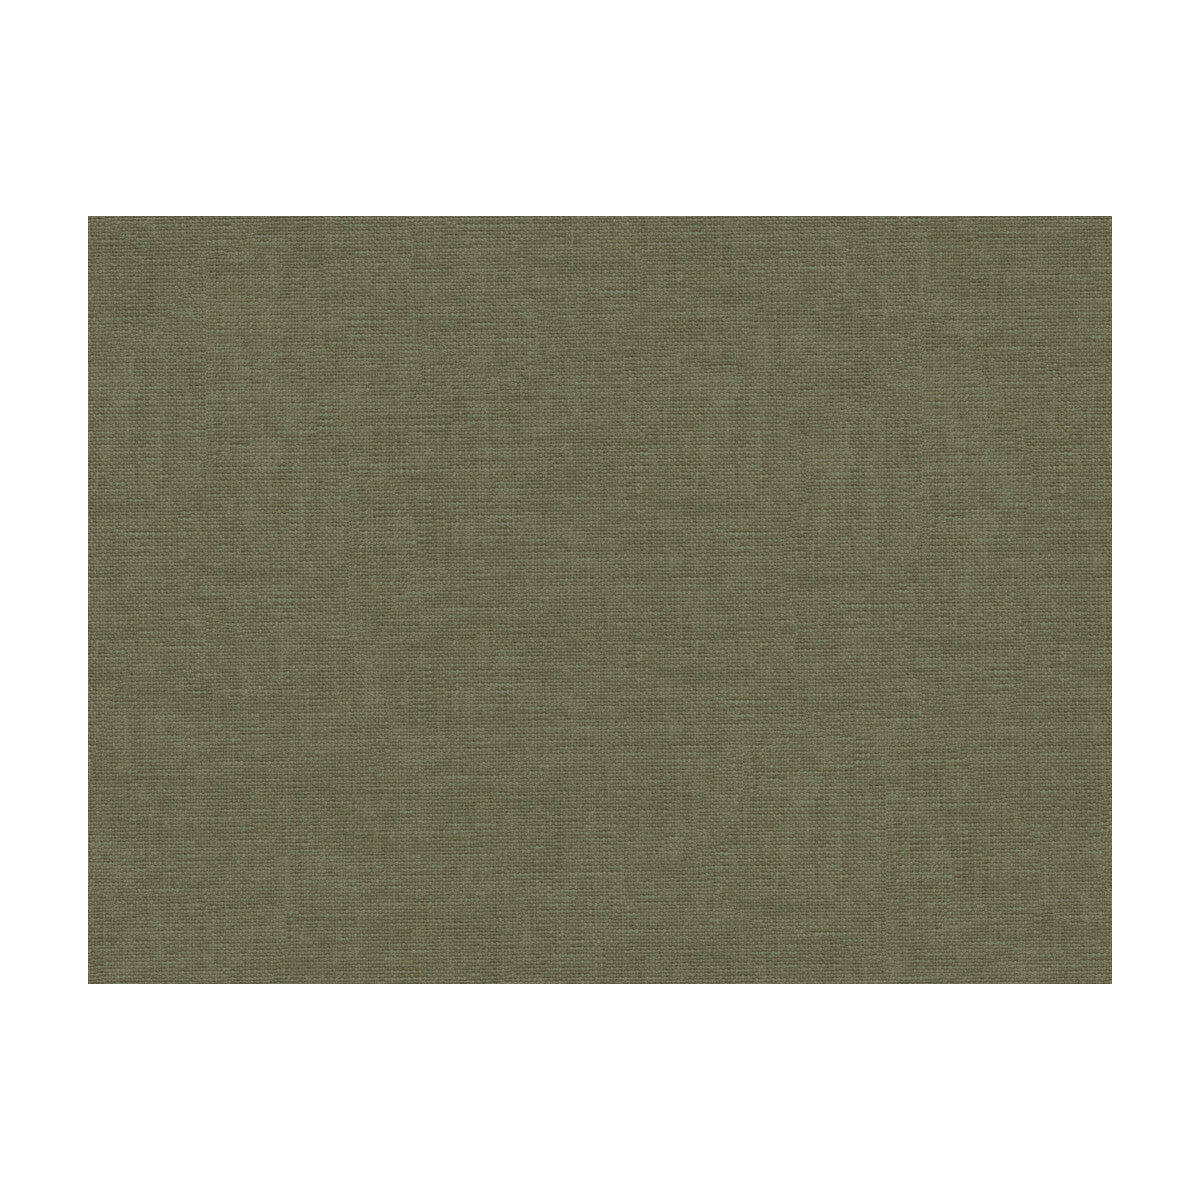 Kravet Basics fabric in 33214-11 color - pattern 33214.11.0 - by Kravet Basics in the Perfect Plains collection